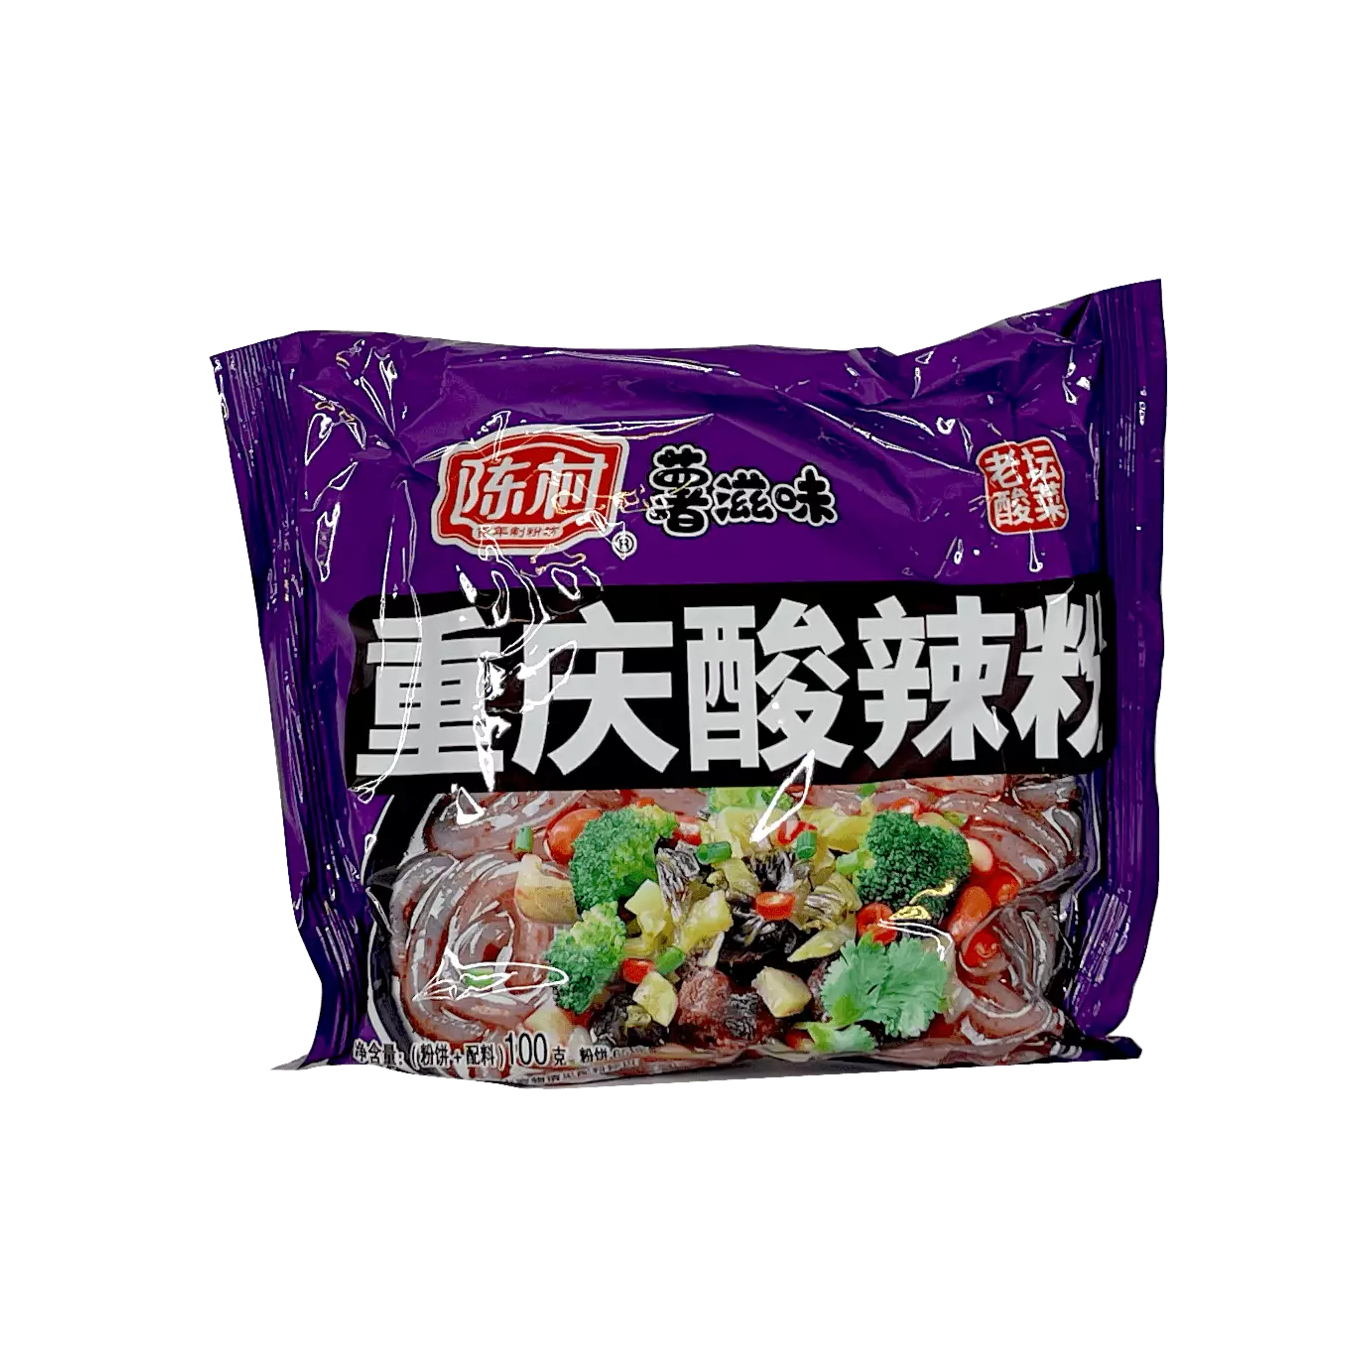 Instant glass noodles Chongqing Strong/Sour 100g Chen Cun China